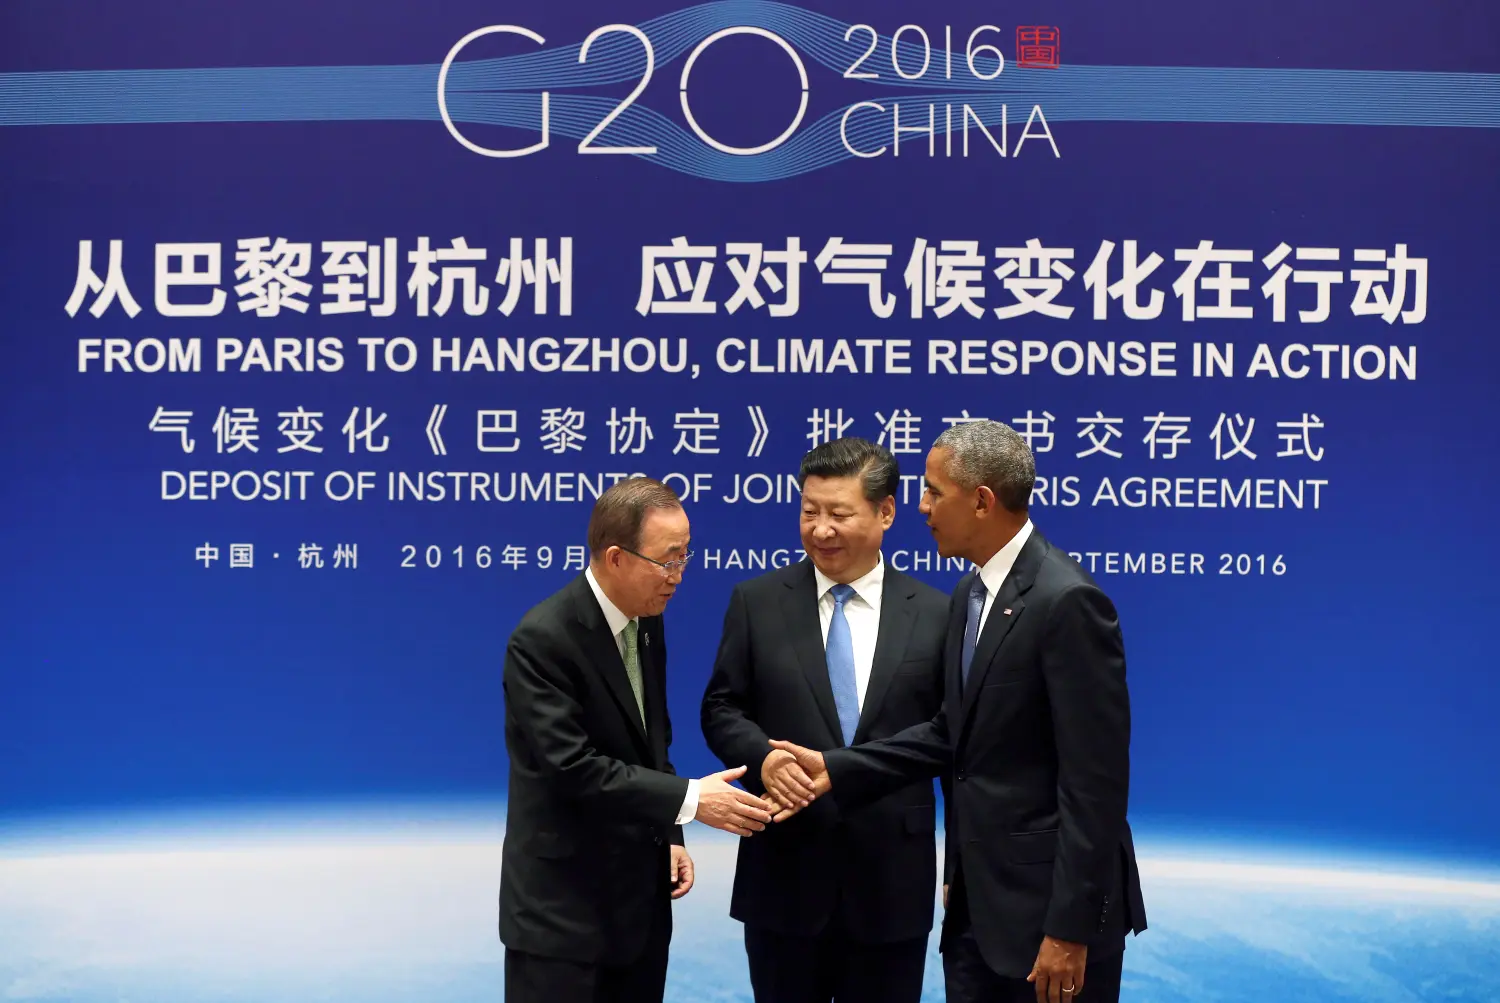 Chinese President Xi Jinping (C), UN Secretary General Ban Ki-moon and U.S. President Barack Obama (R) shake hands during a joint ratification of the Paris climate change agreement ceremony ahead of the G20 Summit at the West Lake State Guest House in Hangzhou, China on September 3, 2016. REUTERS/How Hwee Young/Pool/File Photo - TM3ECBA1TEJ01